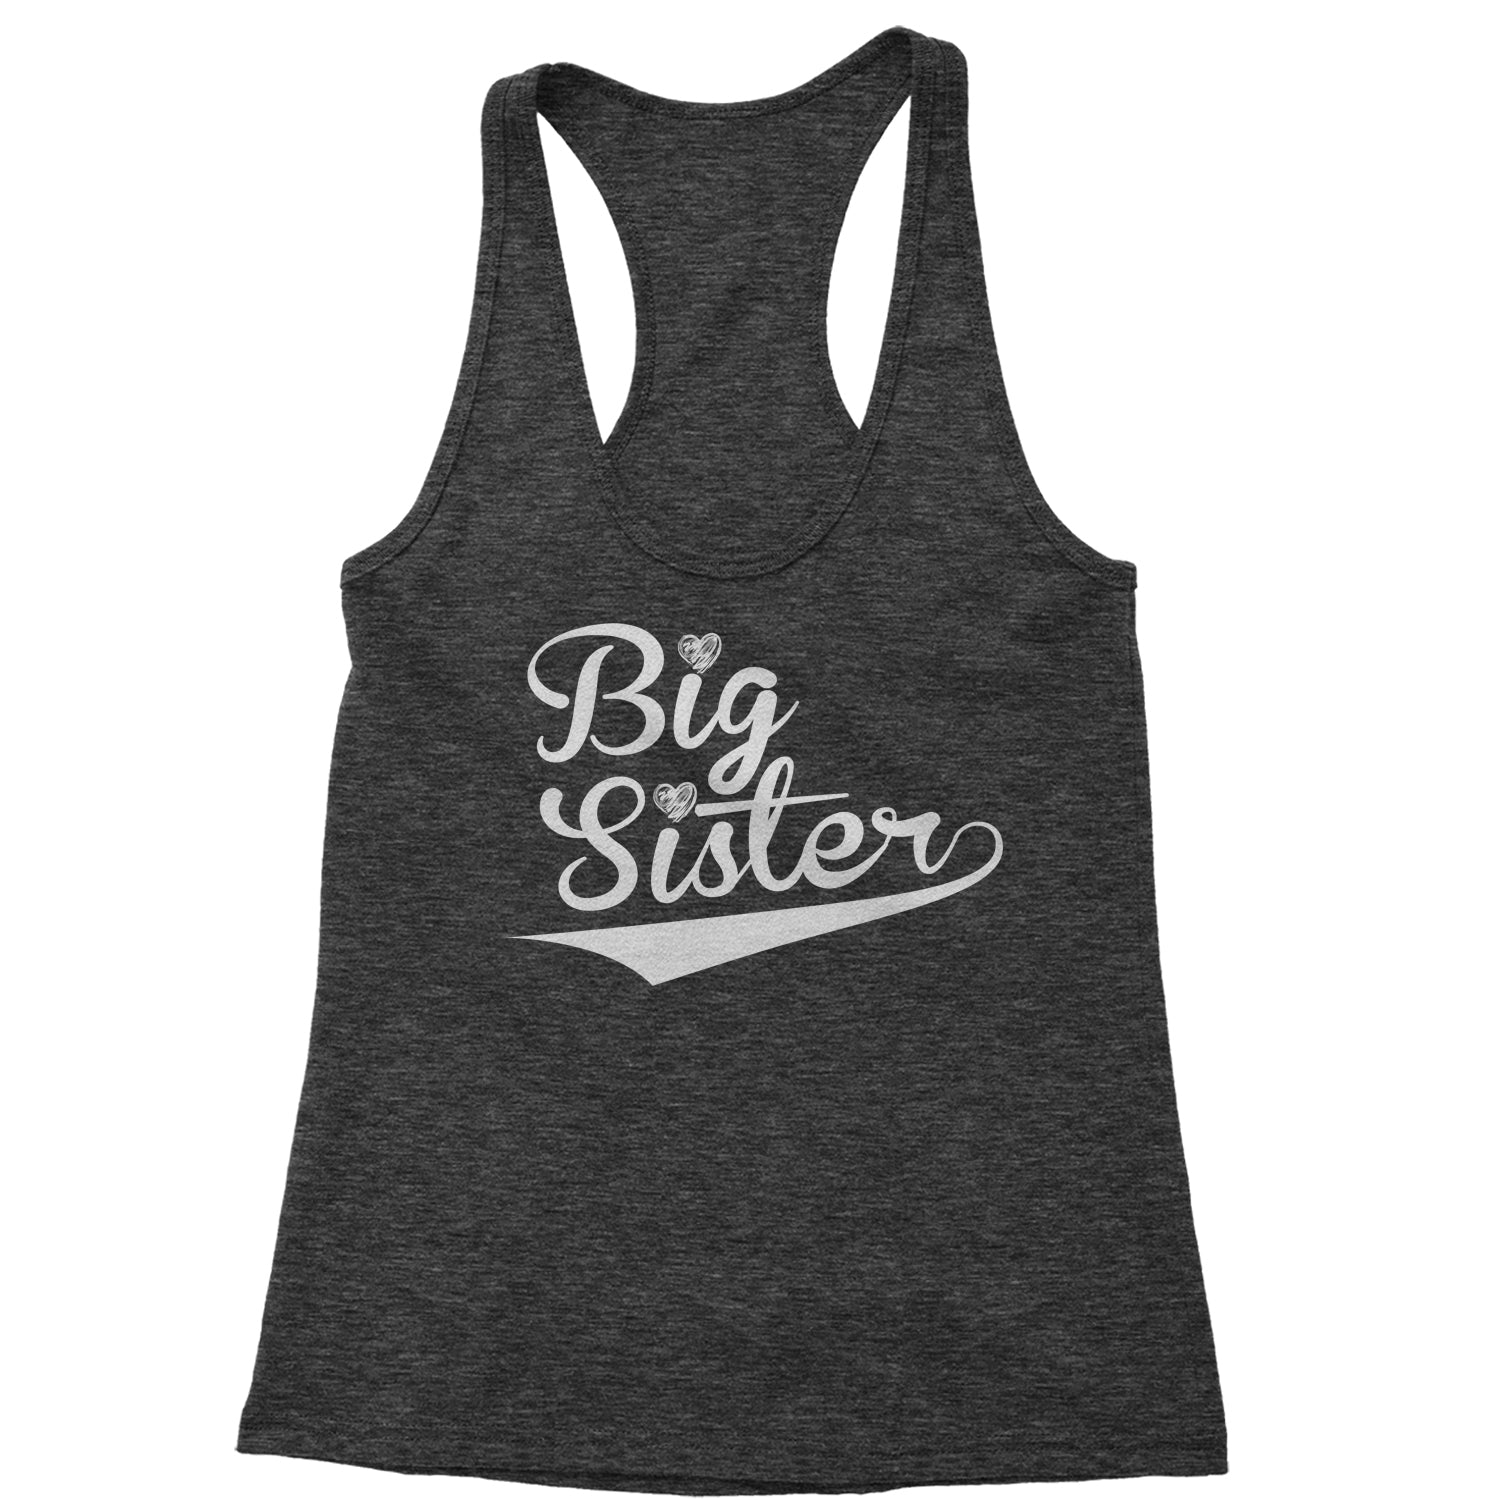 Big Sister Sibling Racerback Tank Top for Women announcement, big, brother, family, little, rivalry, sibling, sister by Expression Tees